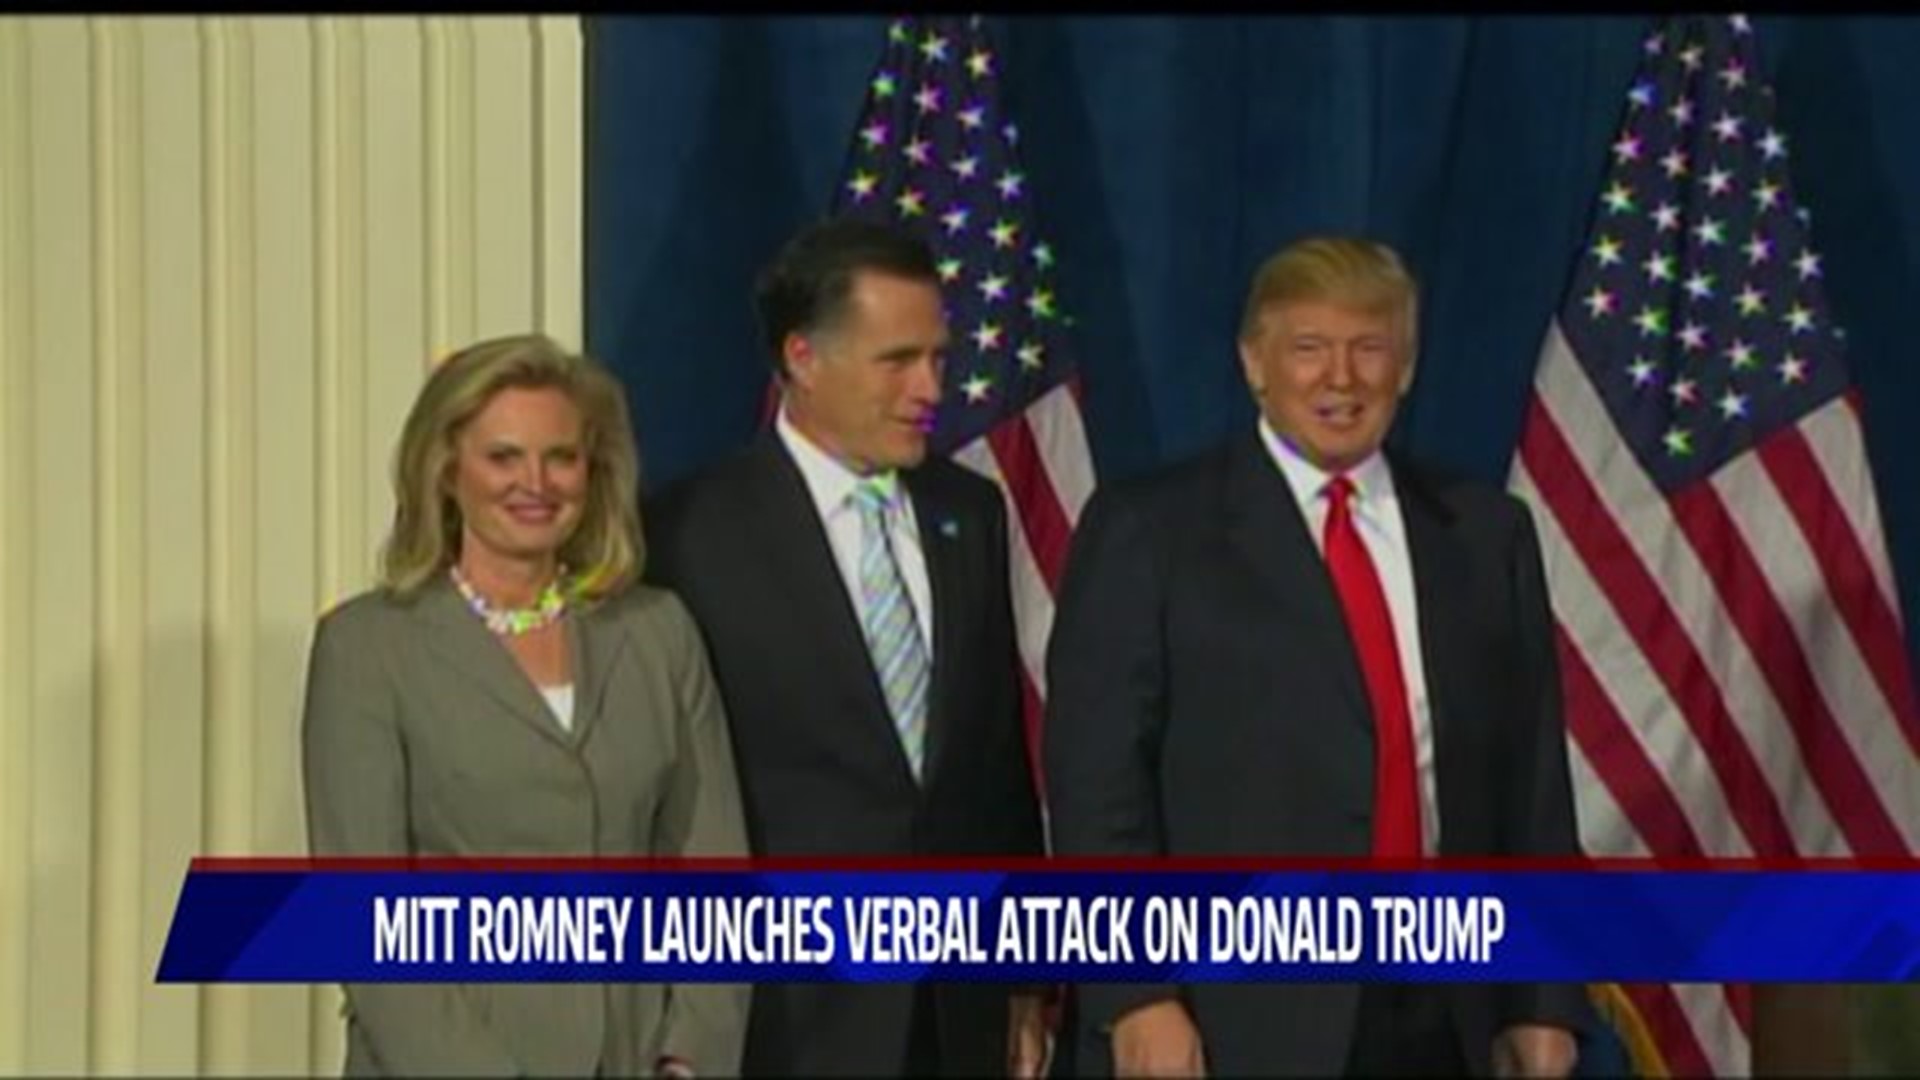 Chairman of Connecticut Republican party speaks out on Romney-Trump showdown